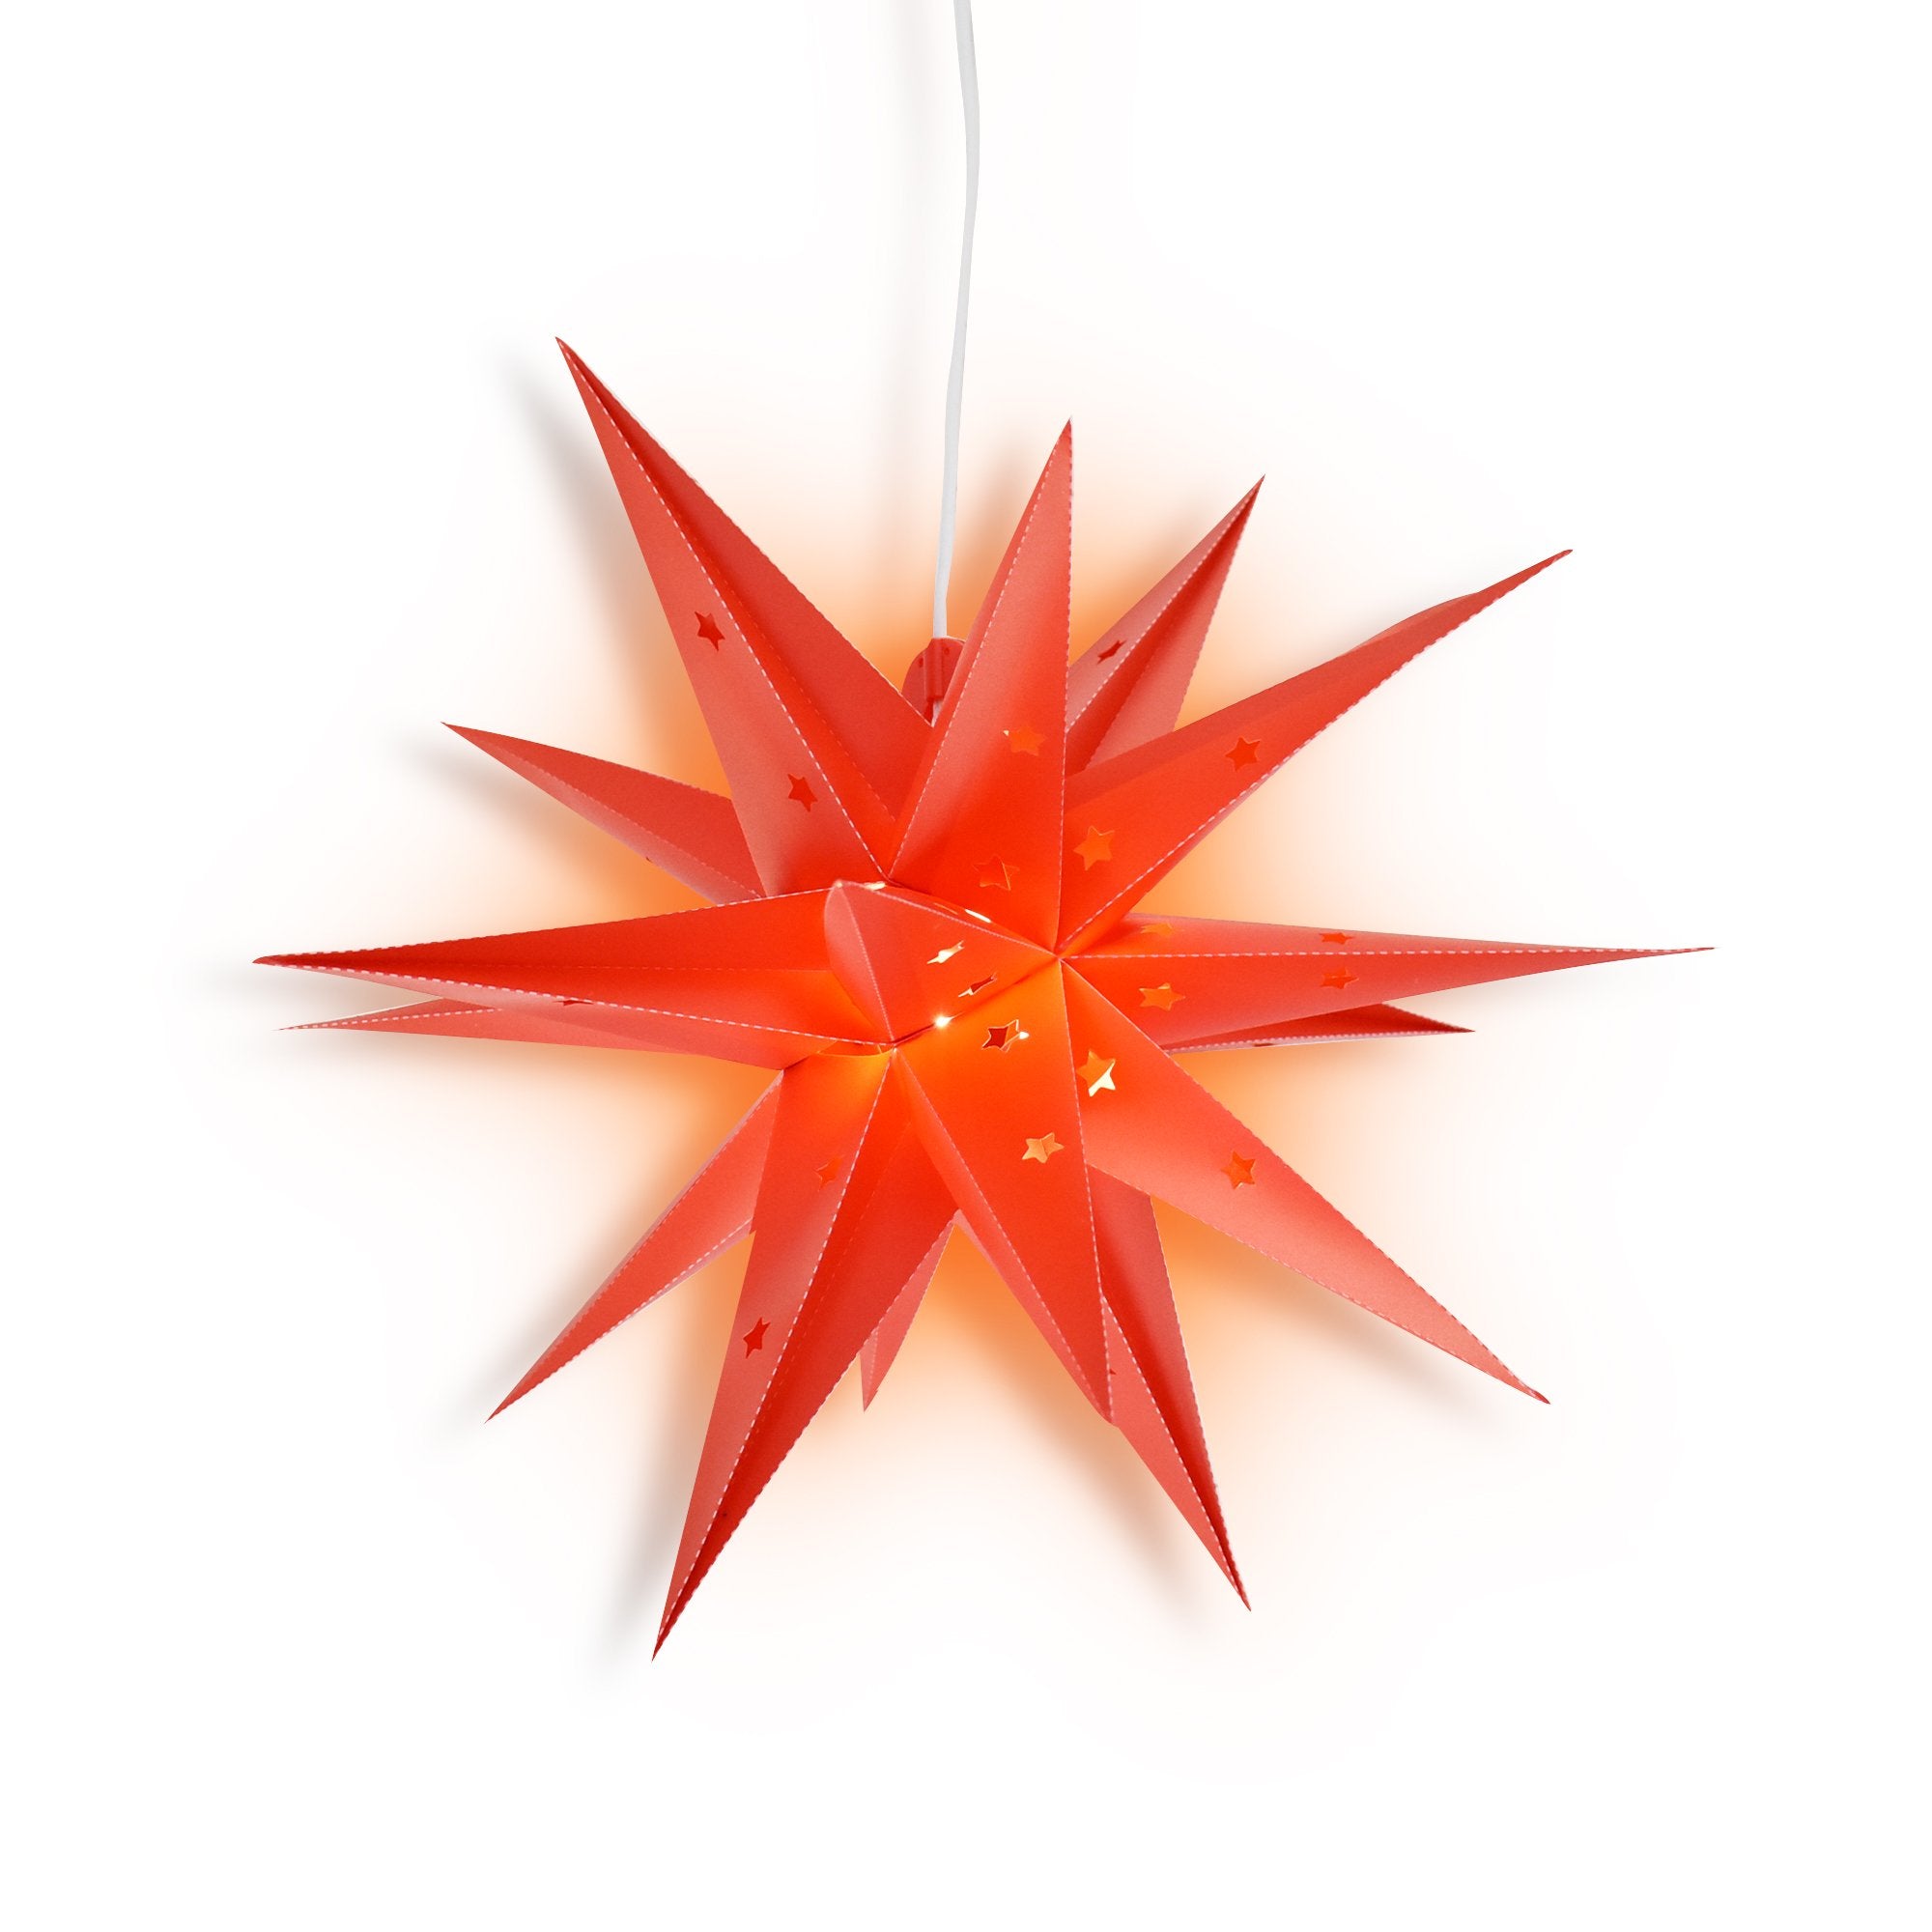 20" Red Moravian Weatherproof Star Lantern Lamp, Multi-Point Hanging Decoration (Shade Only)